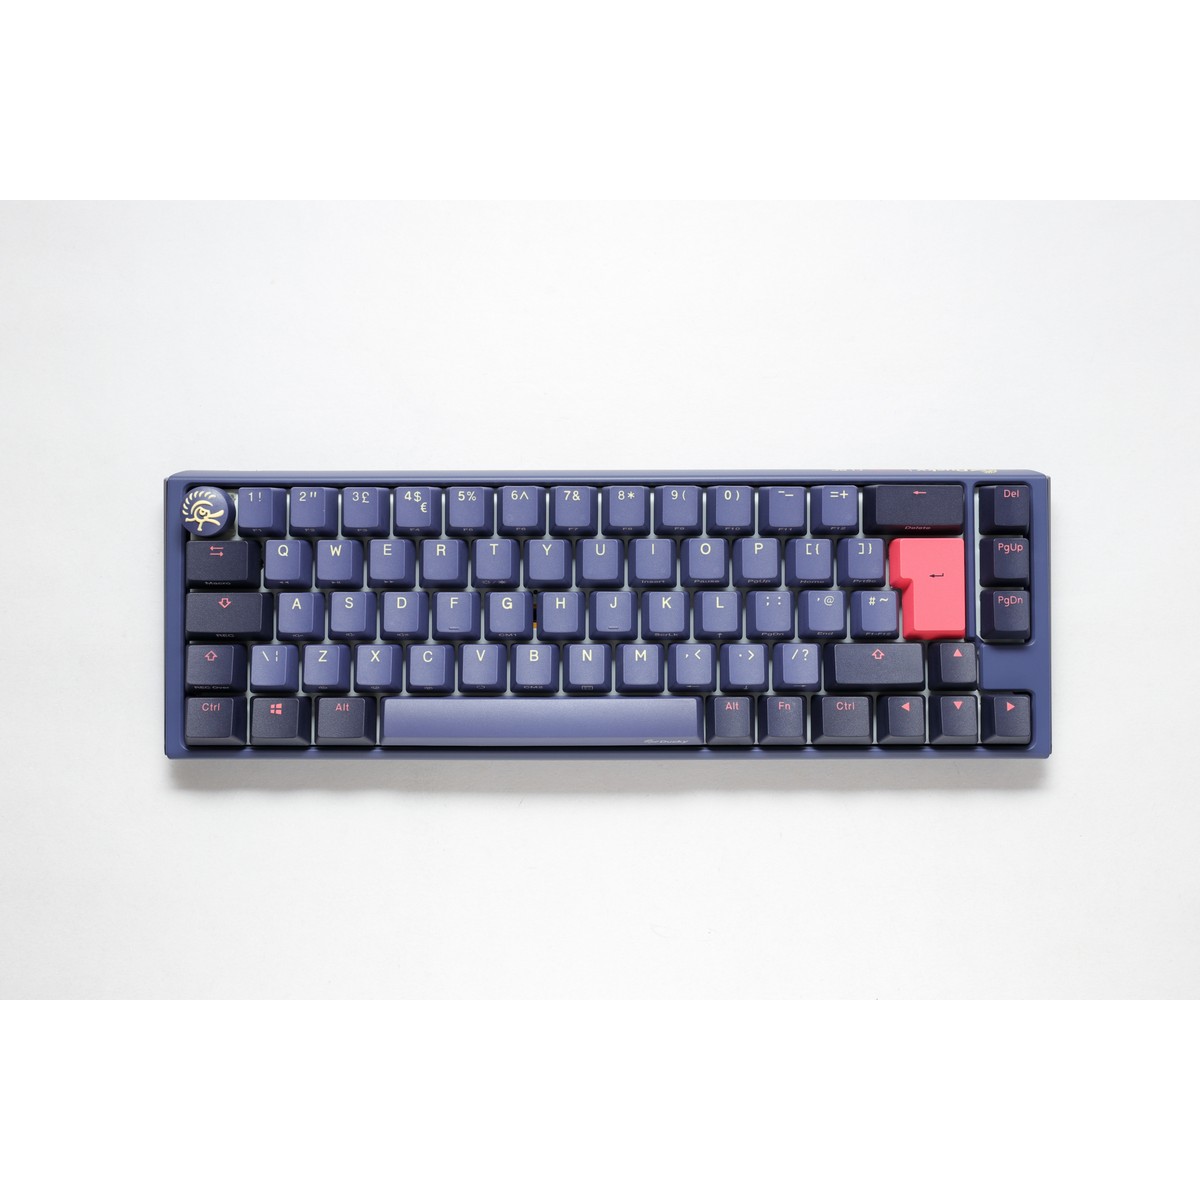 Ducky - Ducky One 3 Cosmic SF 65% USB RGB Mechanical Gaming Keyboard Cherry MX Brown Switch - UK Layout